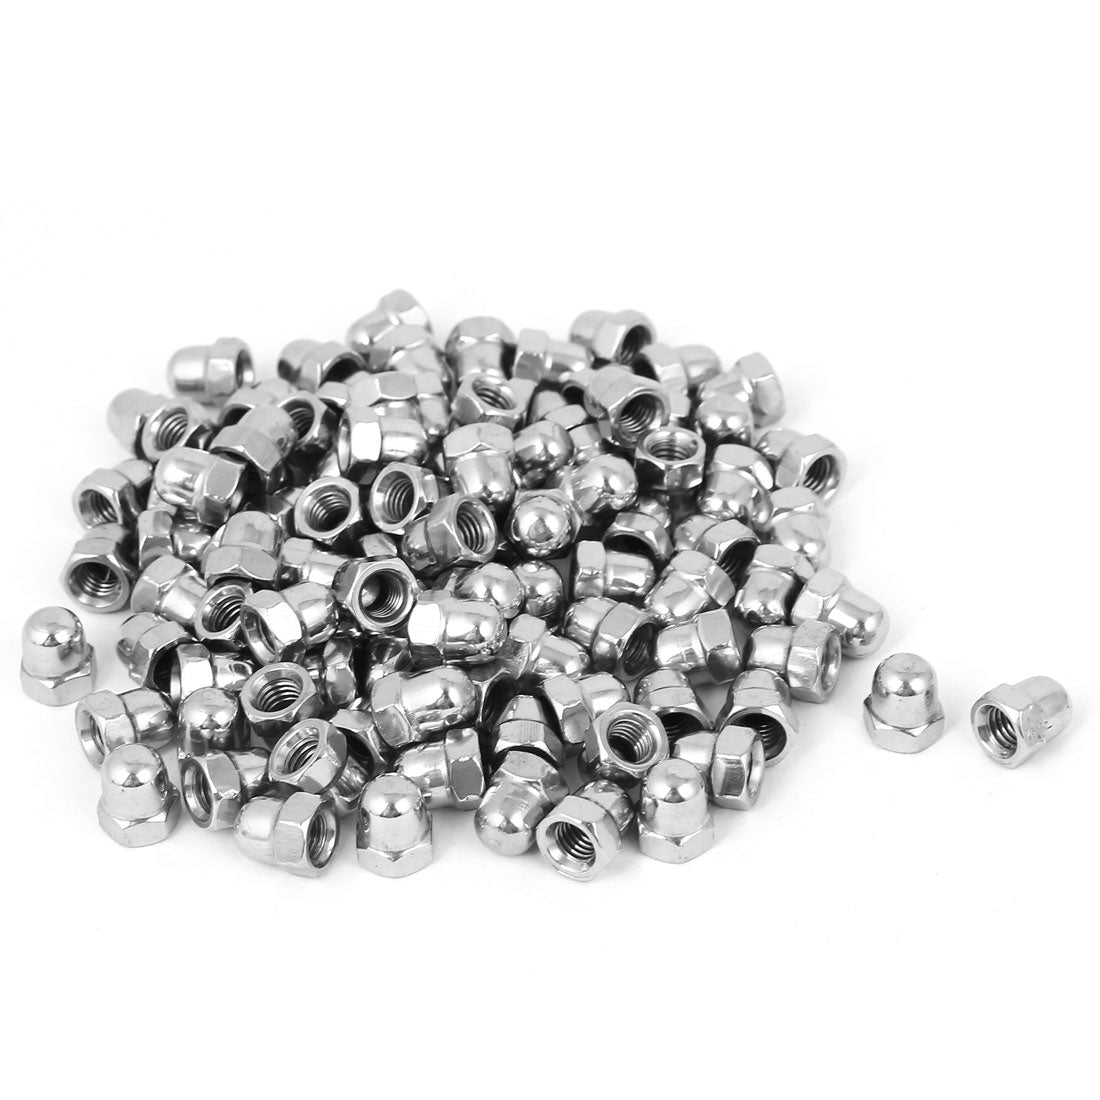 uxcell Uxcell M5 Thread Dia Dome Head Stainless Steel Cap Acorn Hex Nuts 100pcs